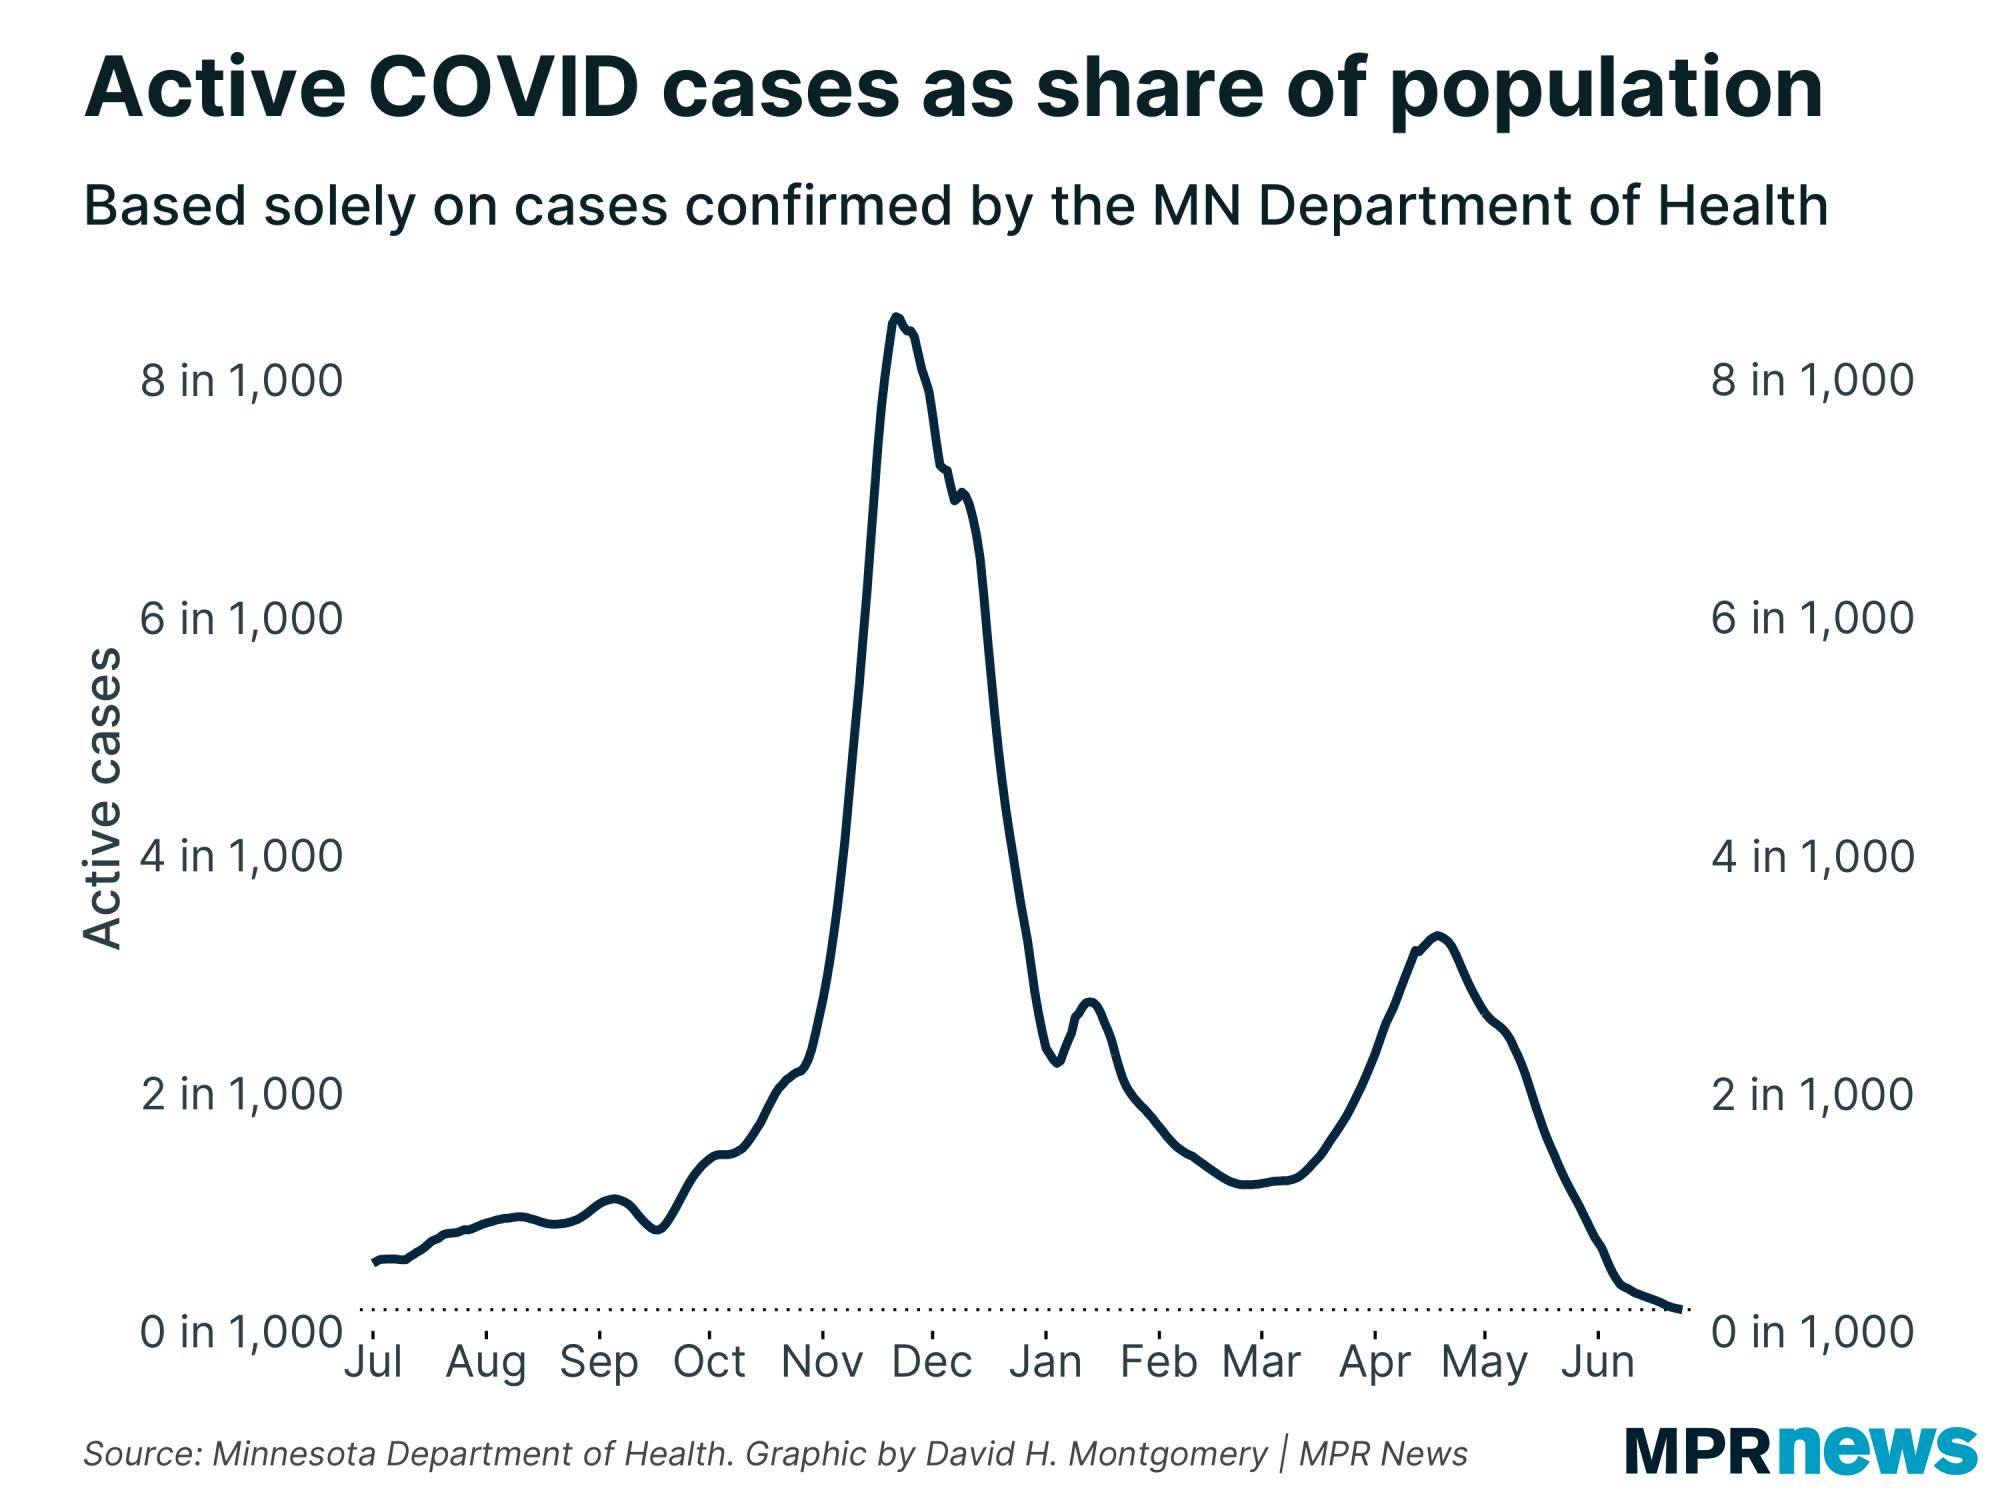 Graph of active, confirmed COVID-19 cases in Minnesota as a share of the population